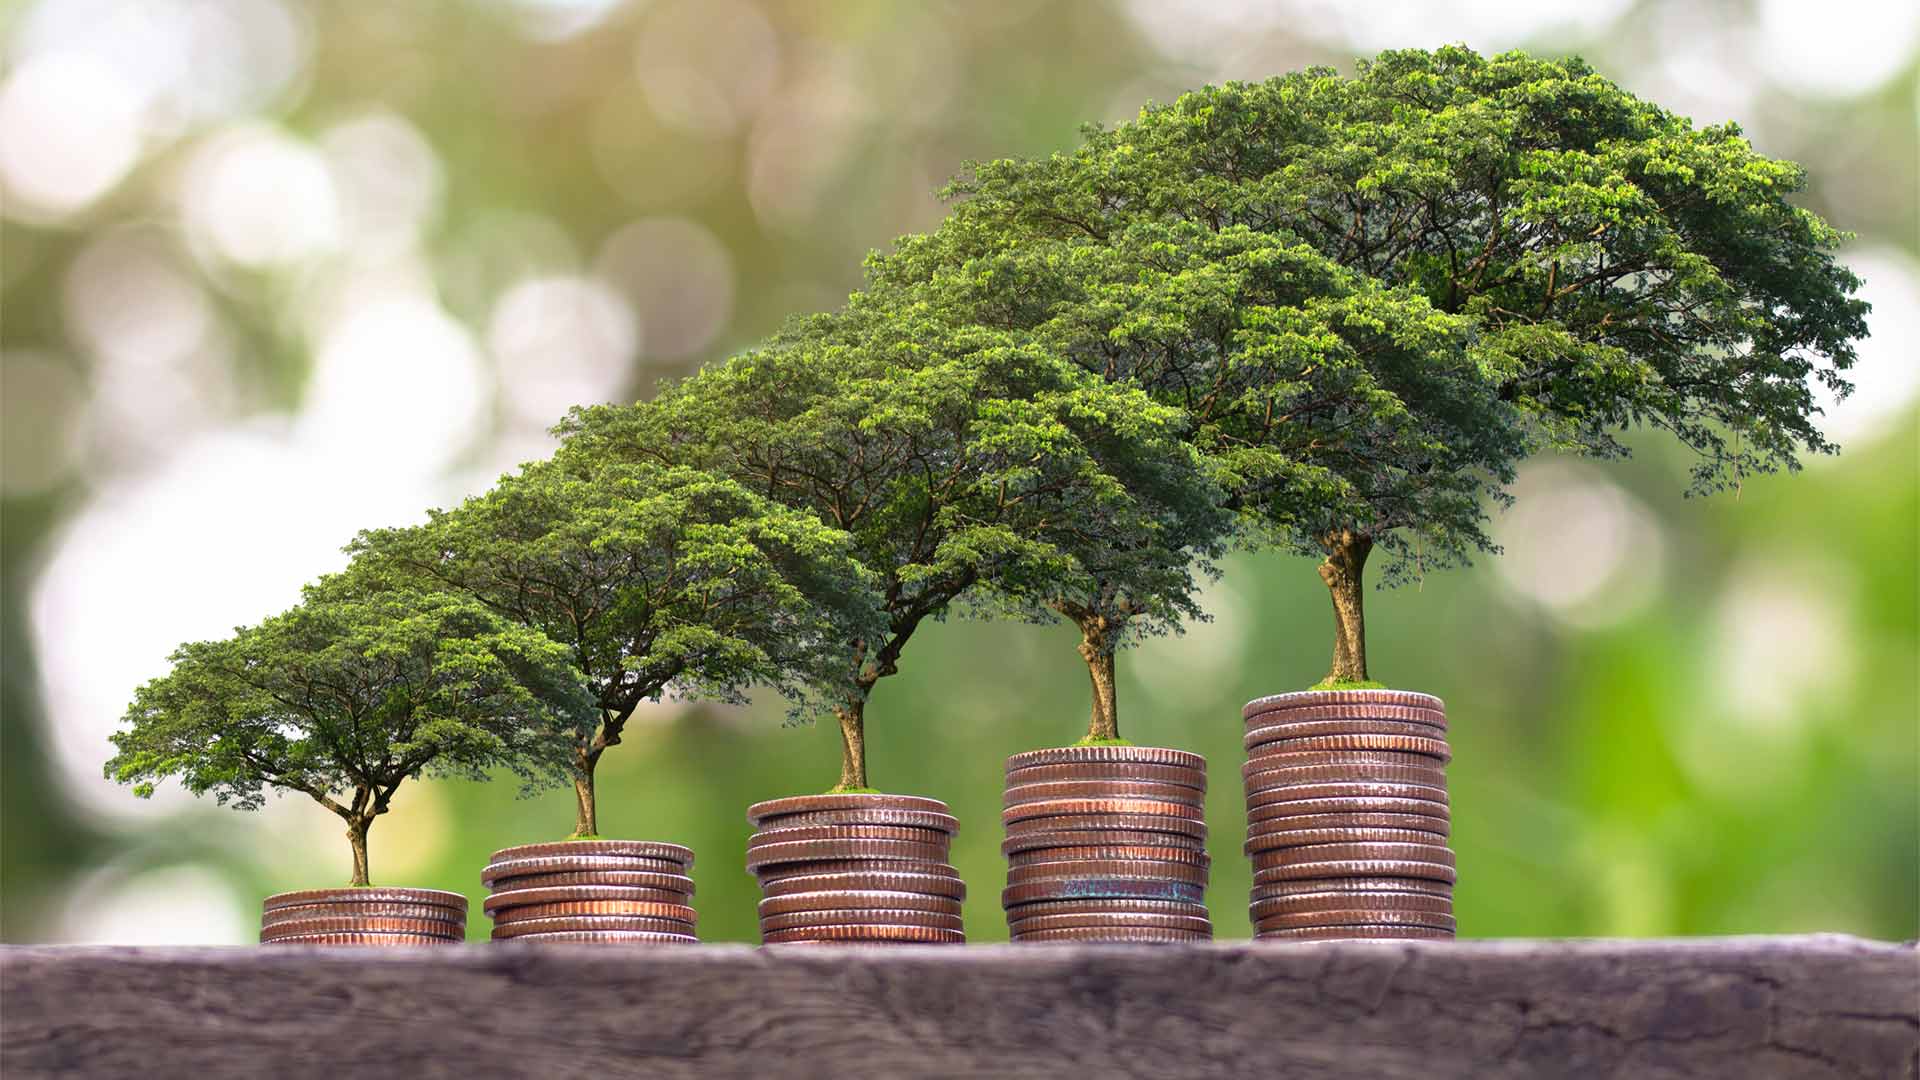 Plant growing on stacks of coins